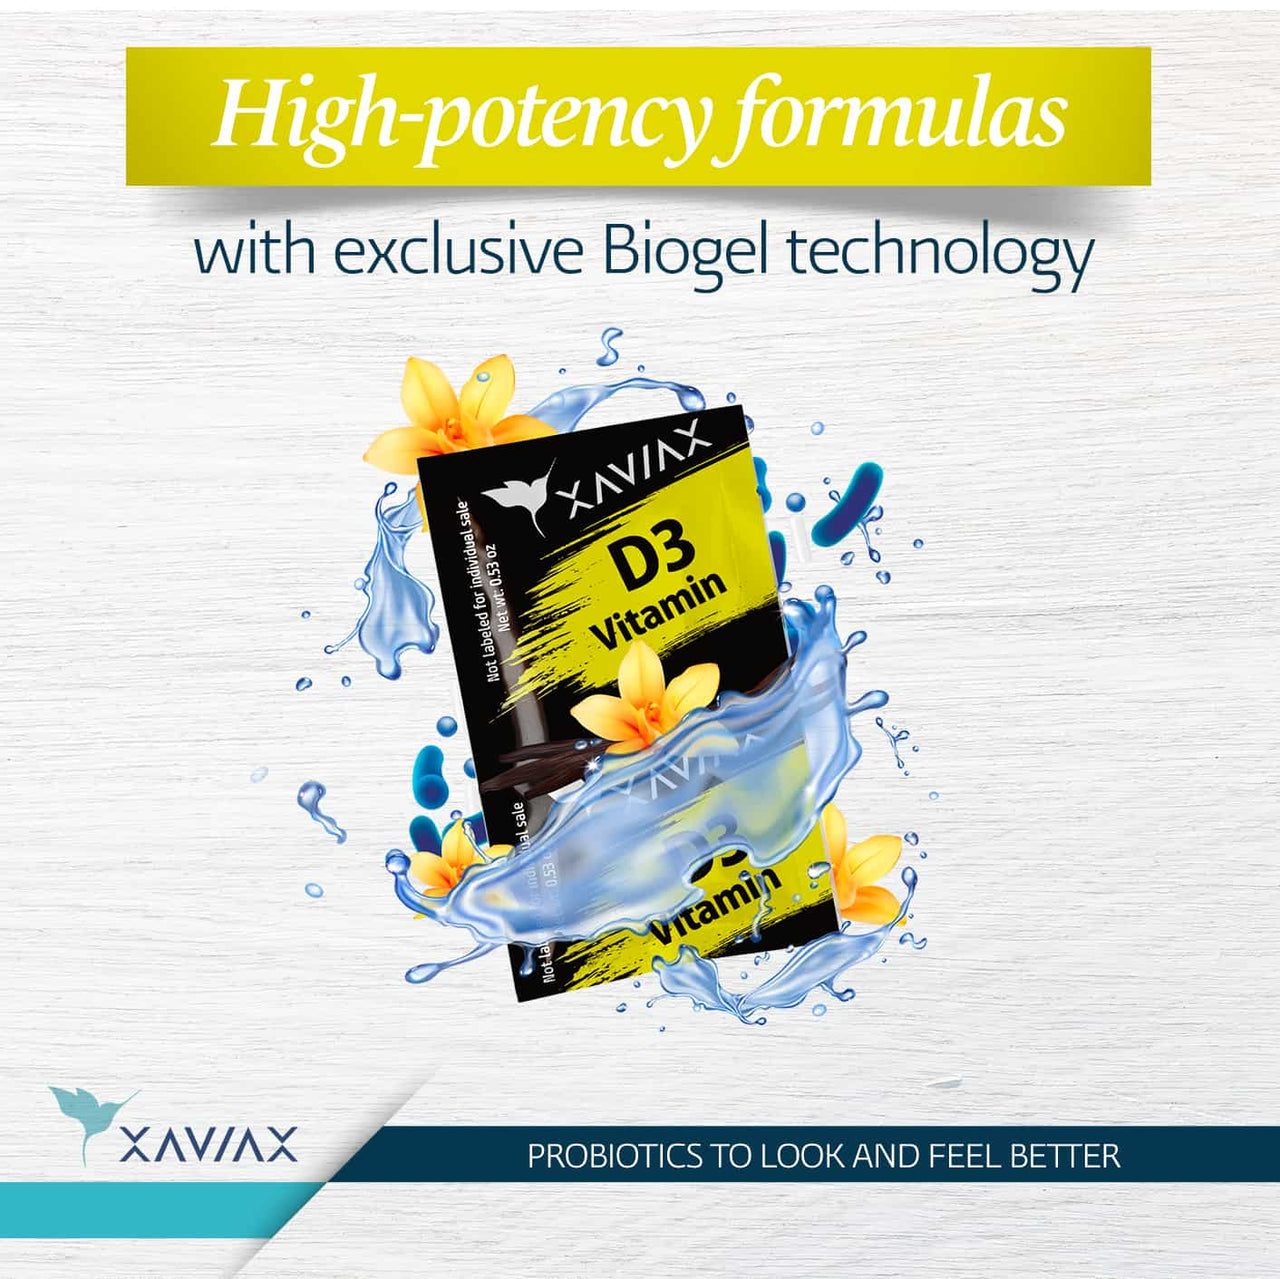 high potency formlas with exclusive biogel technology- vitamin d3